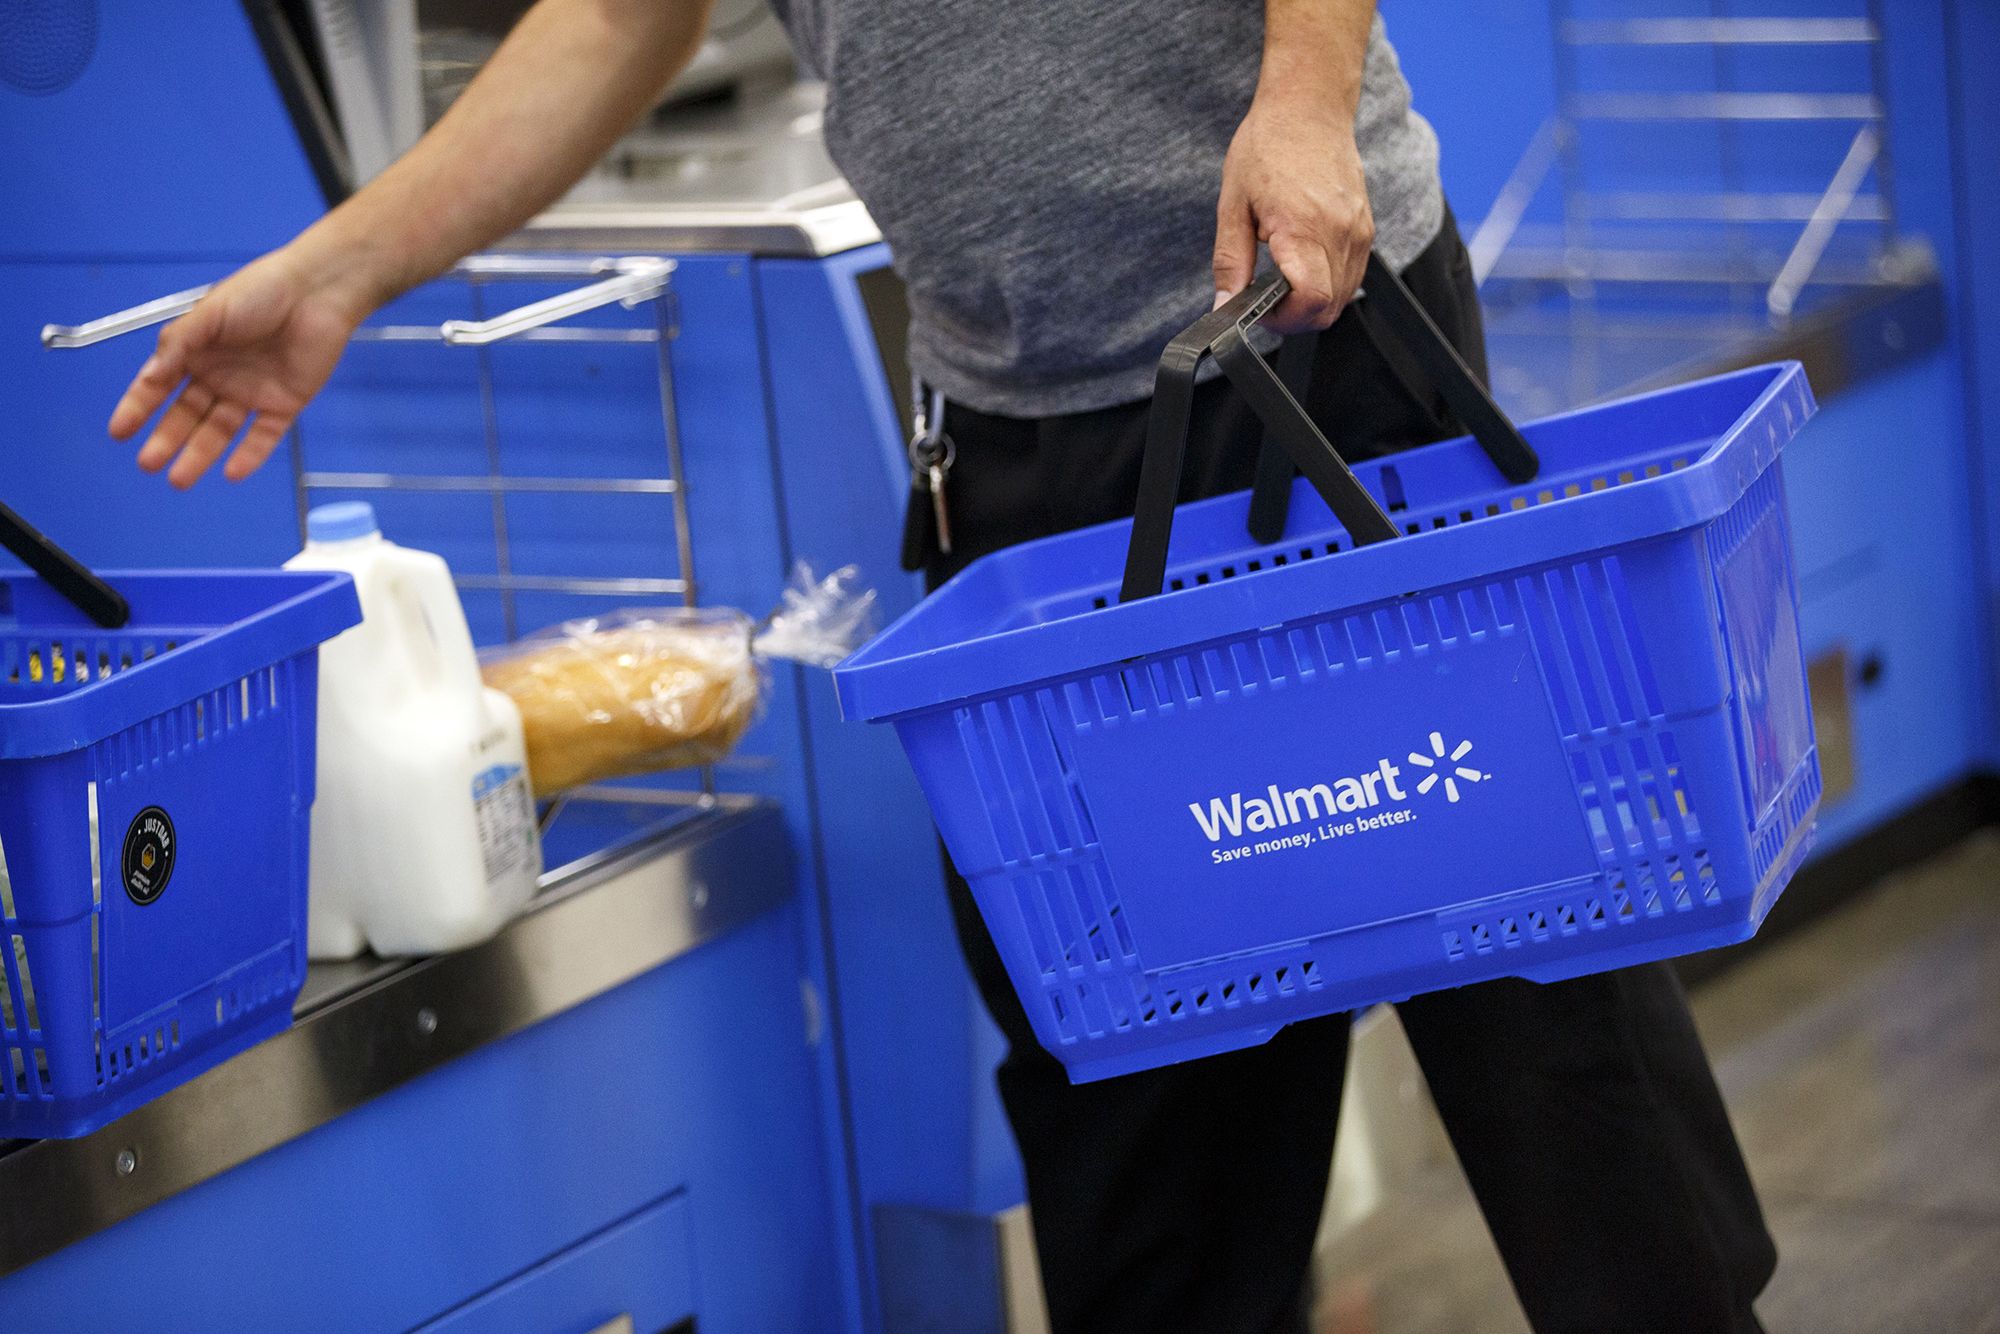 Fresh Is Adding Self-Checkout After Trying Just Walk Out